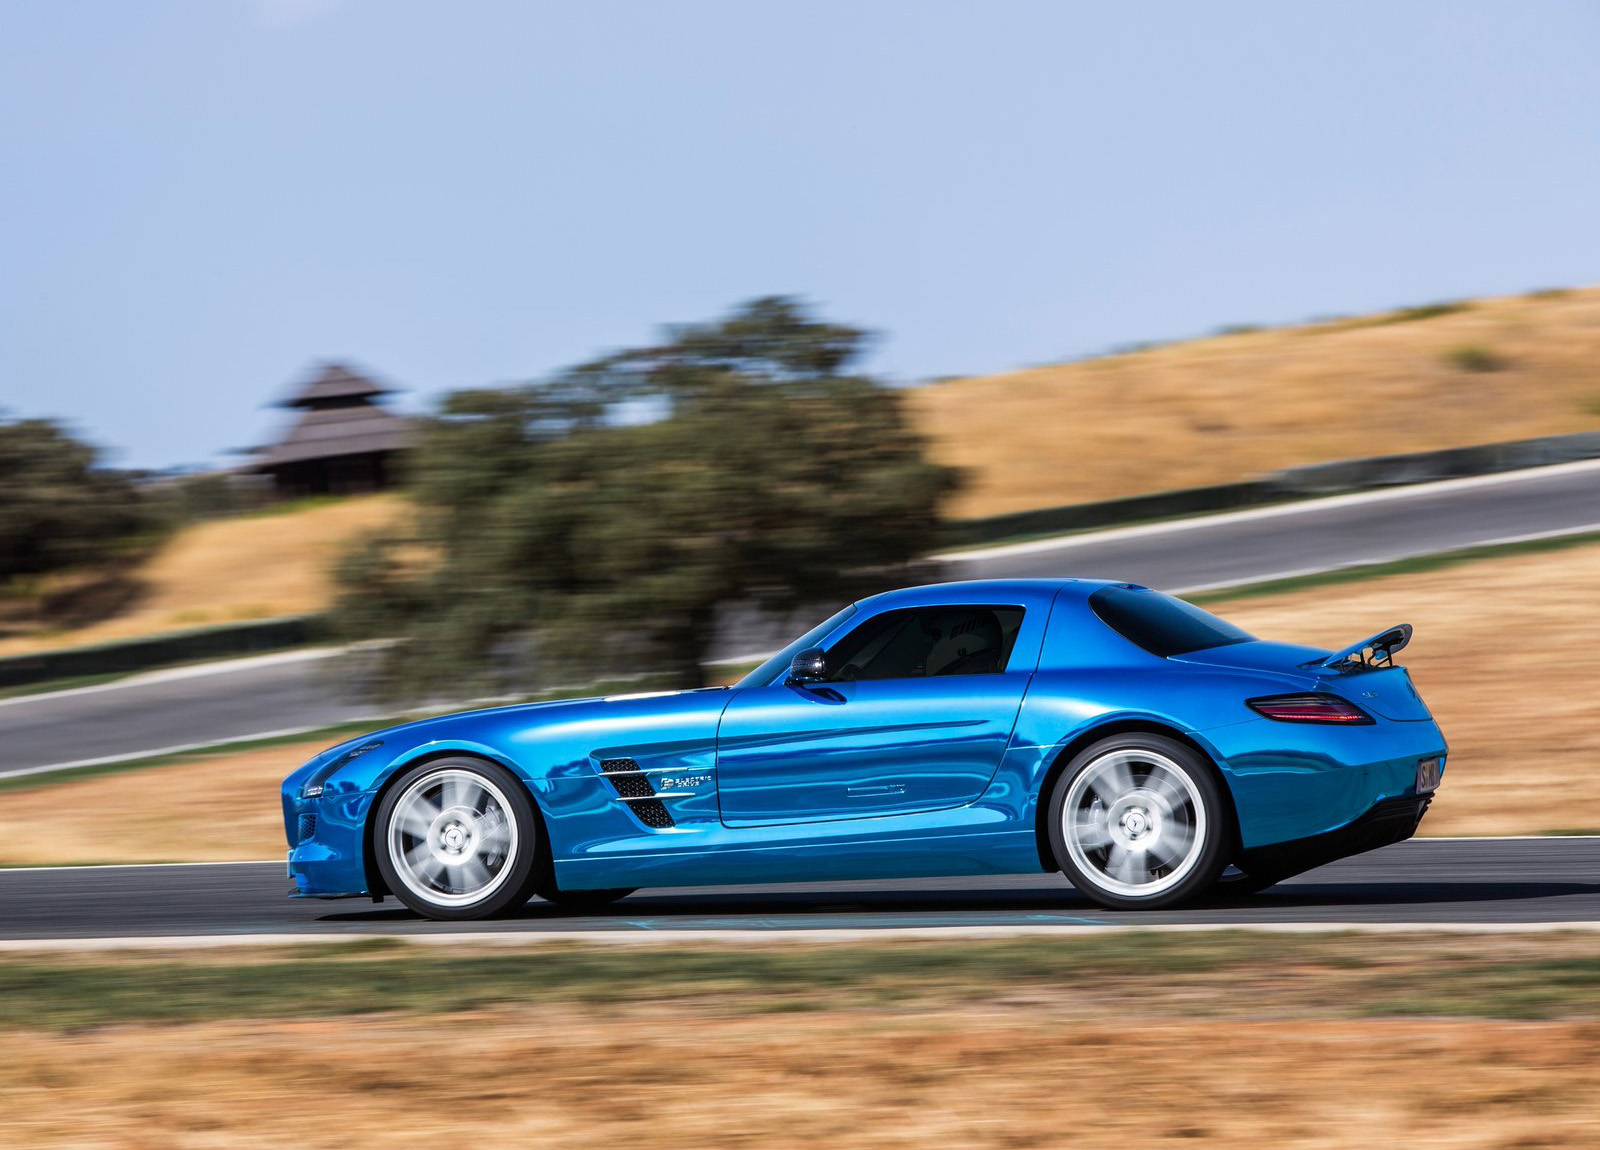 I Can’t Get Over How Much The Mercedes-Benz SLS Electric Drive Cost